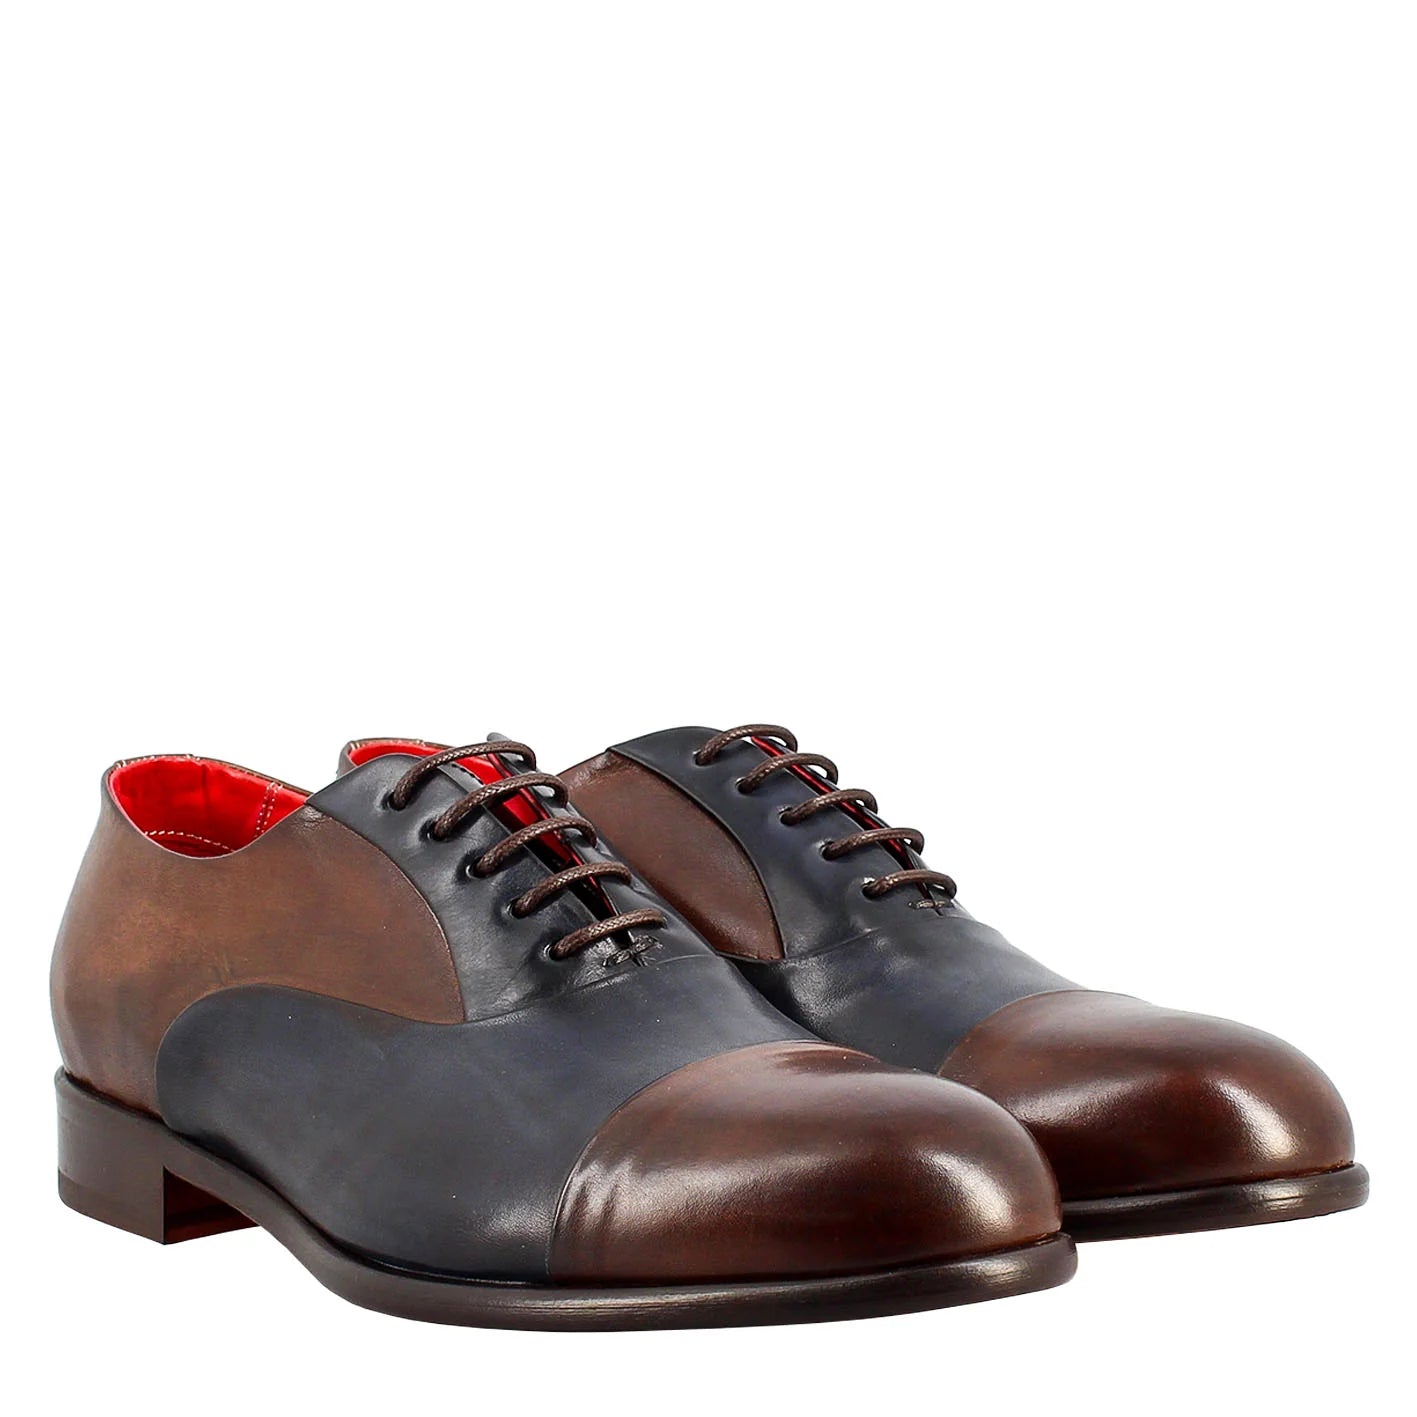 Dark brown and Blue oxford Shoes